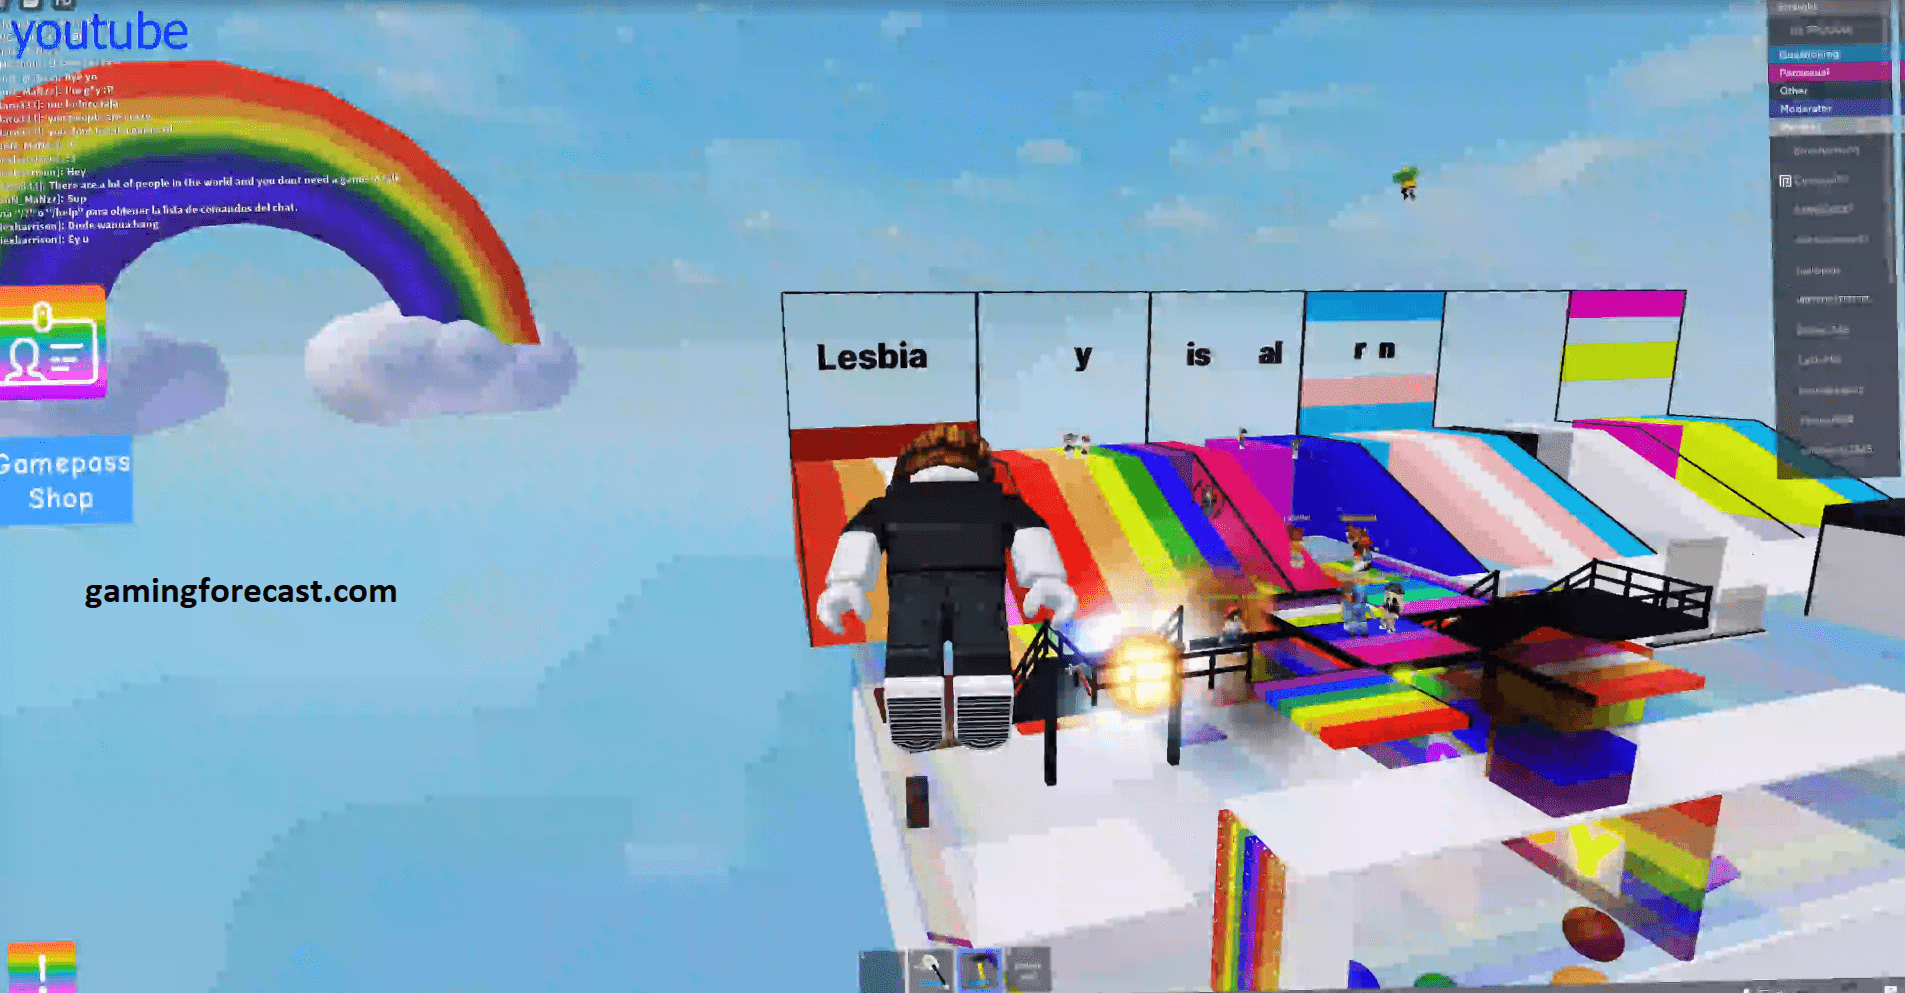 Roblox Hack Download Pc Destroy Lobby Fly Aimbot Scripts 2021 Gaming Forecast Download Free Online Game Hacks - roblox download for free on pc